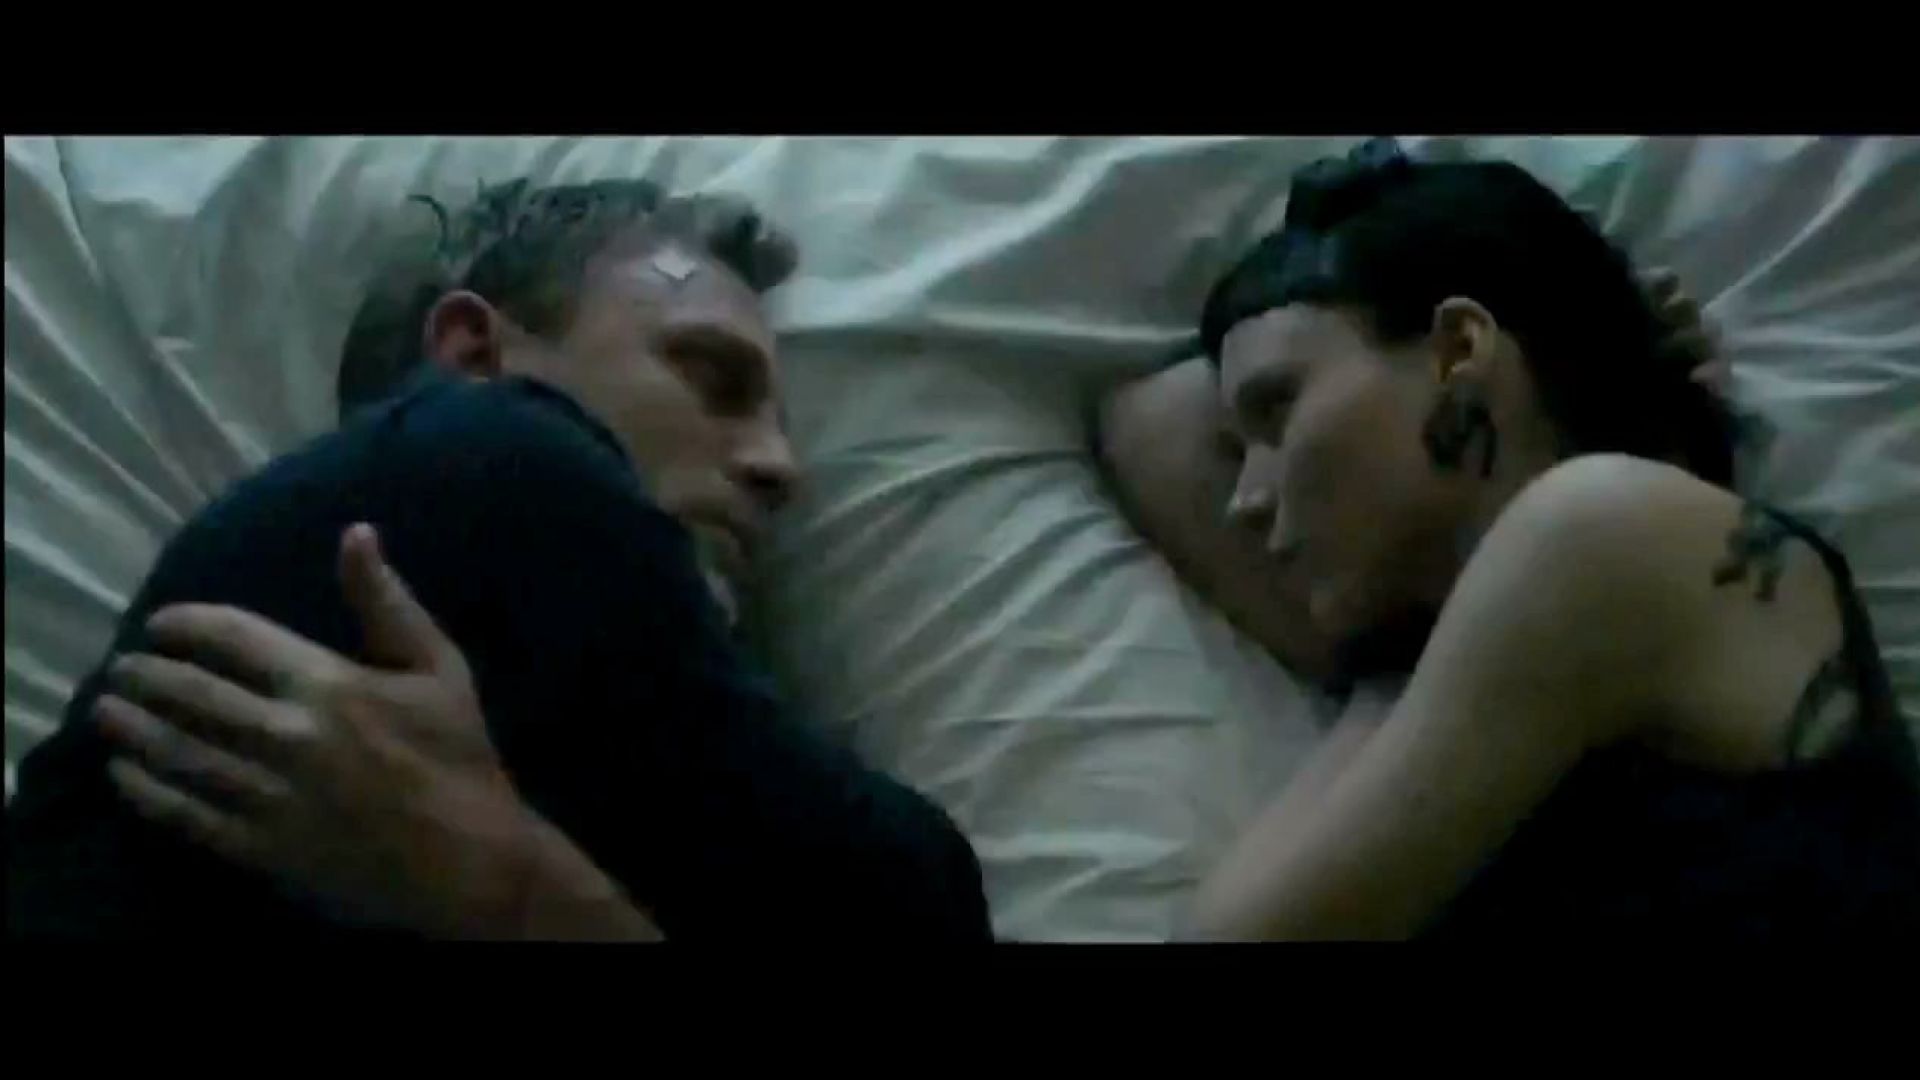 Soon you will know us all. Only too well. The Girl with the Dragon Tattoo